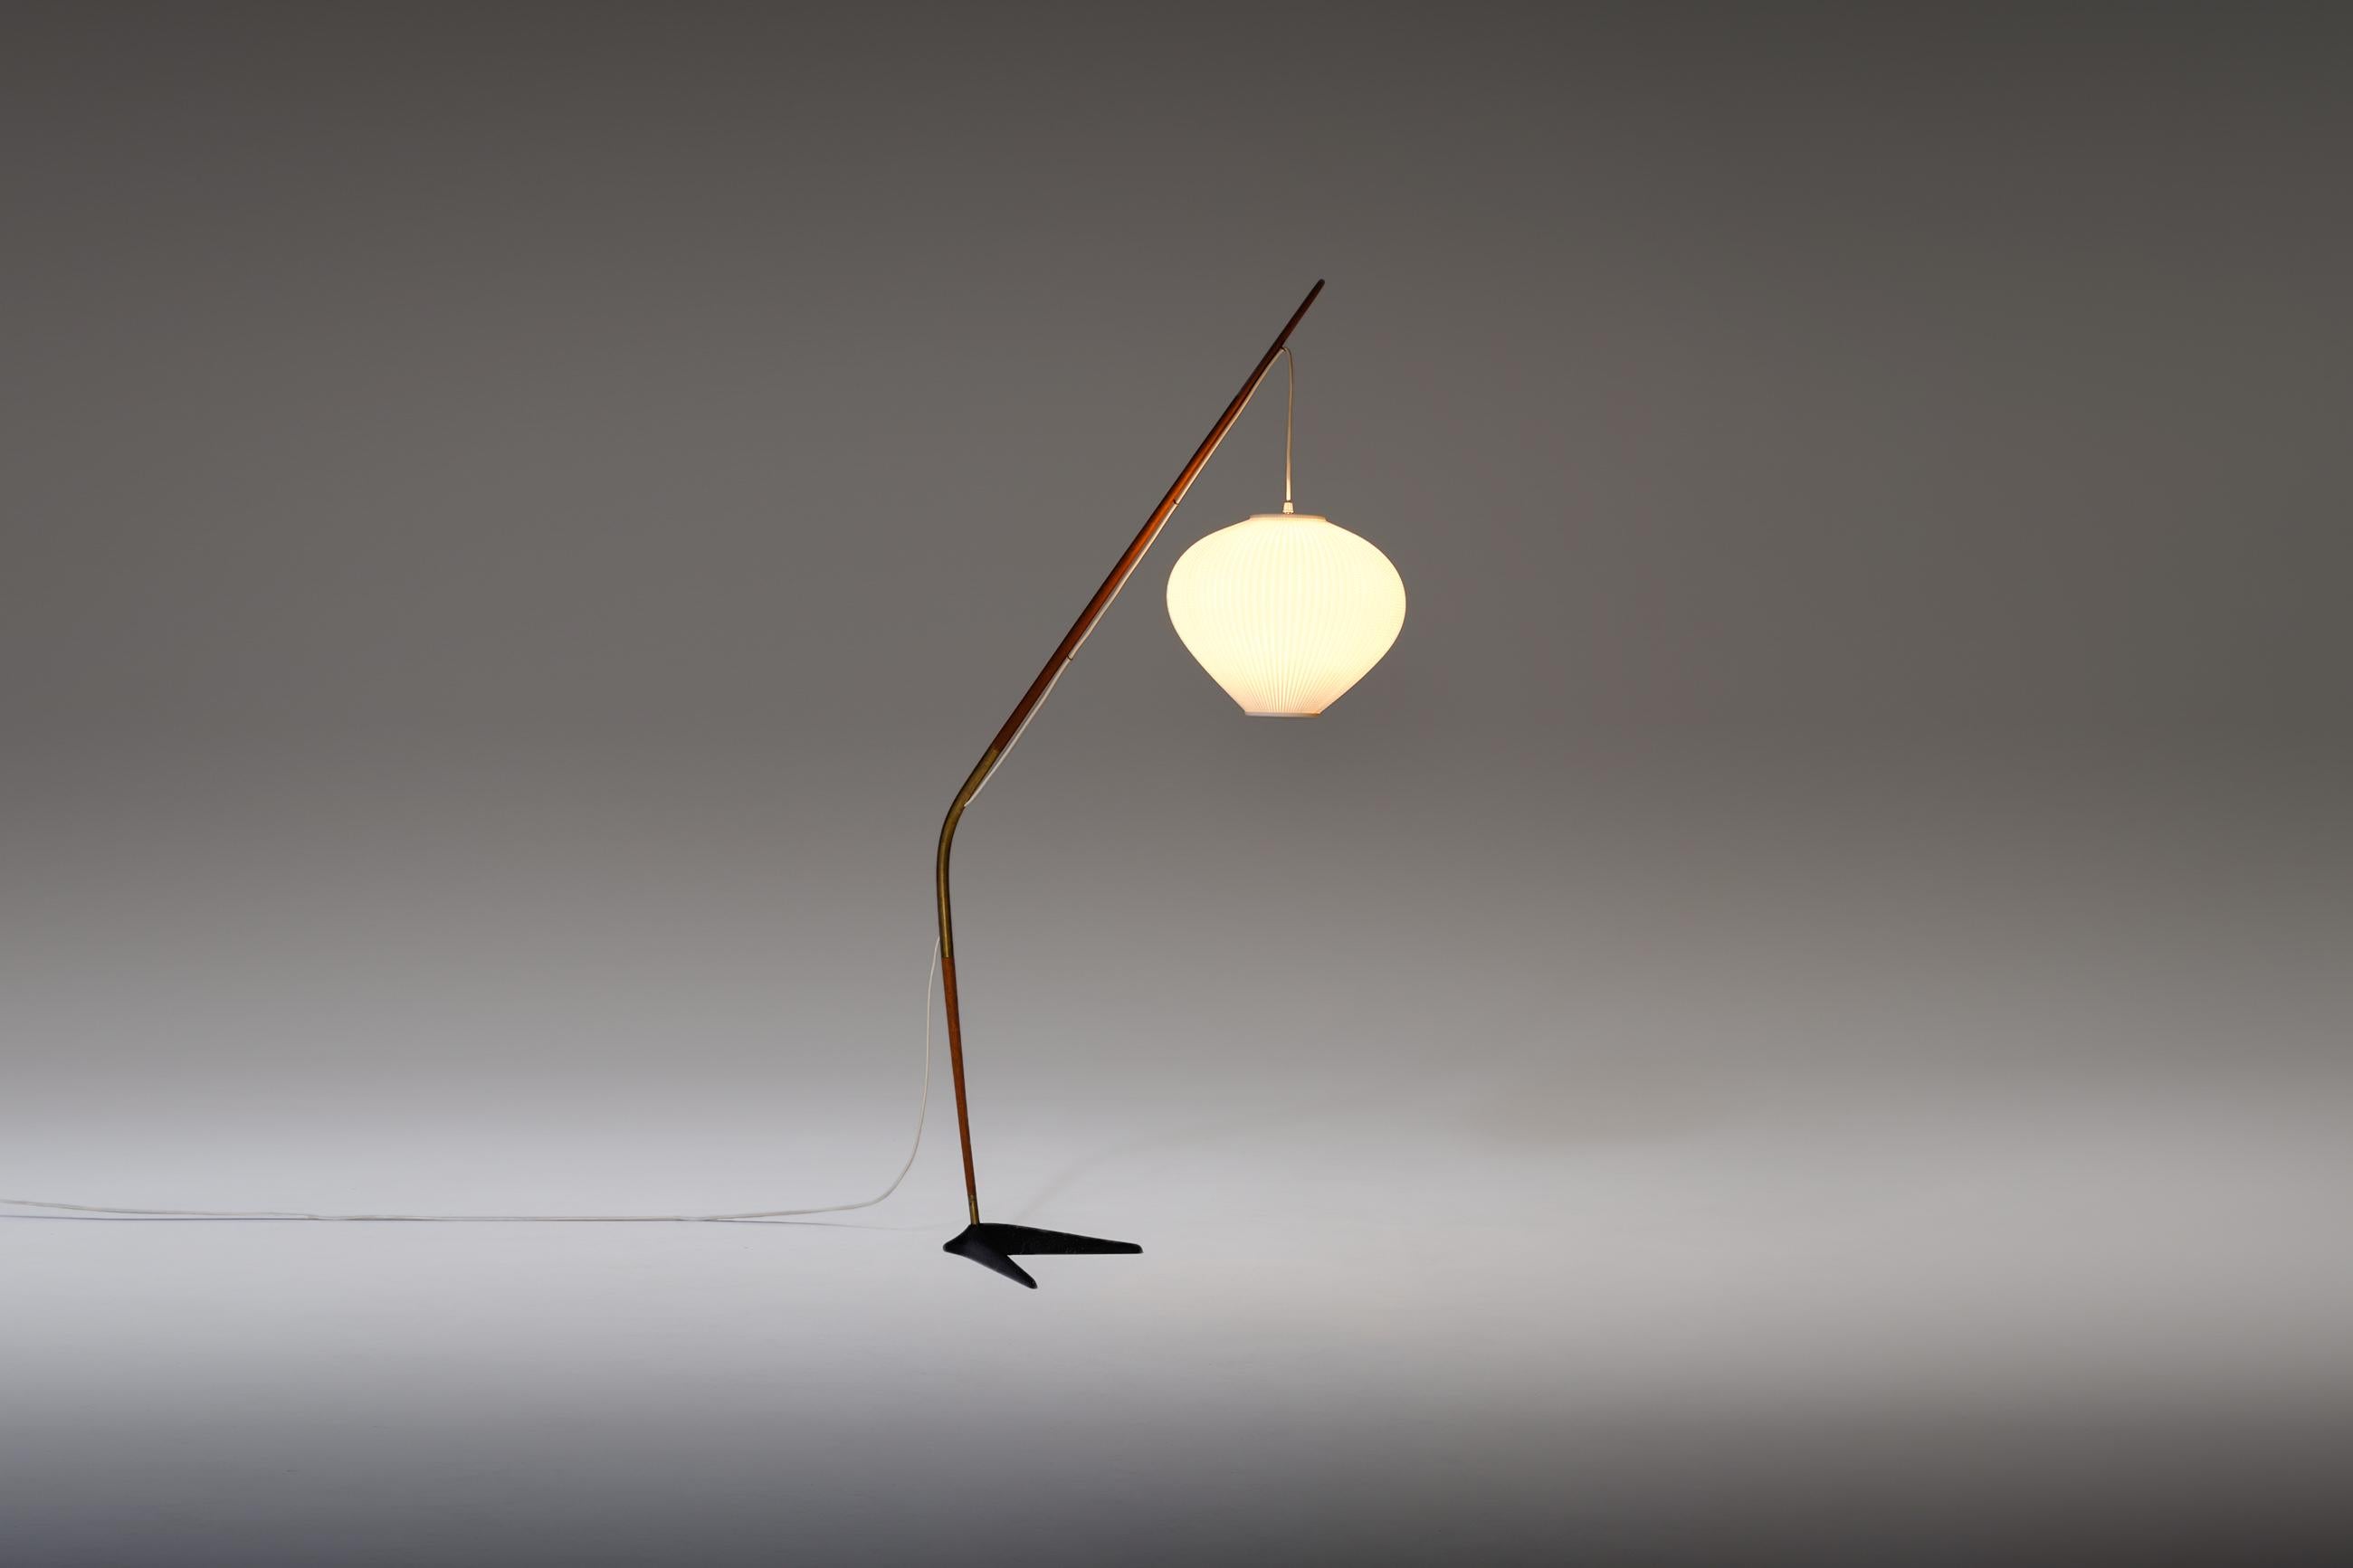 Rare “Fishing Pole” floor lamp by Svend Aage Holm Sorensen, Denmark, 1950s. A well-crafted and elegant midcentury piece composed of teak stem finished with brass details. The black iron base balances the stem and creates a nice contrast between the